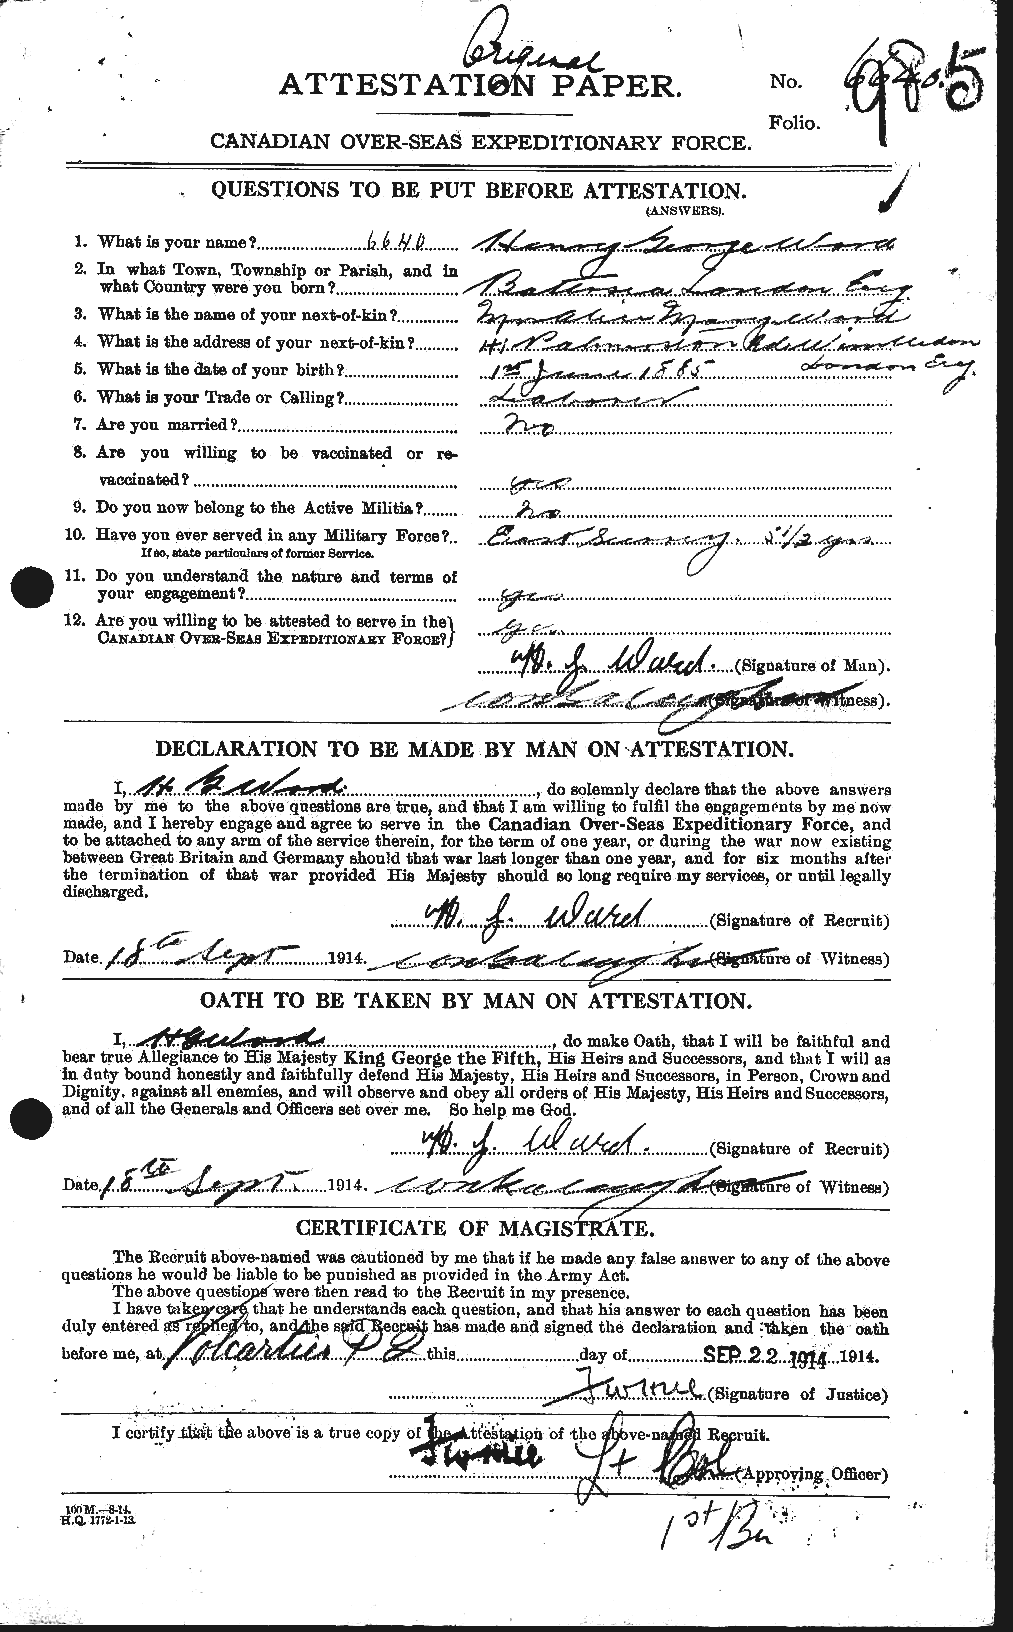 Personnel Records of the First World War - CEF 657837a